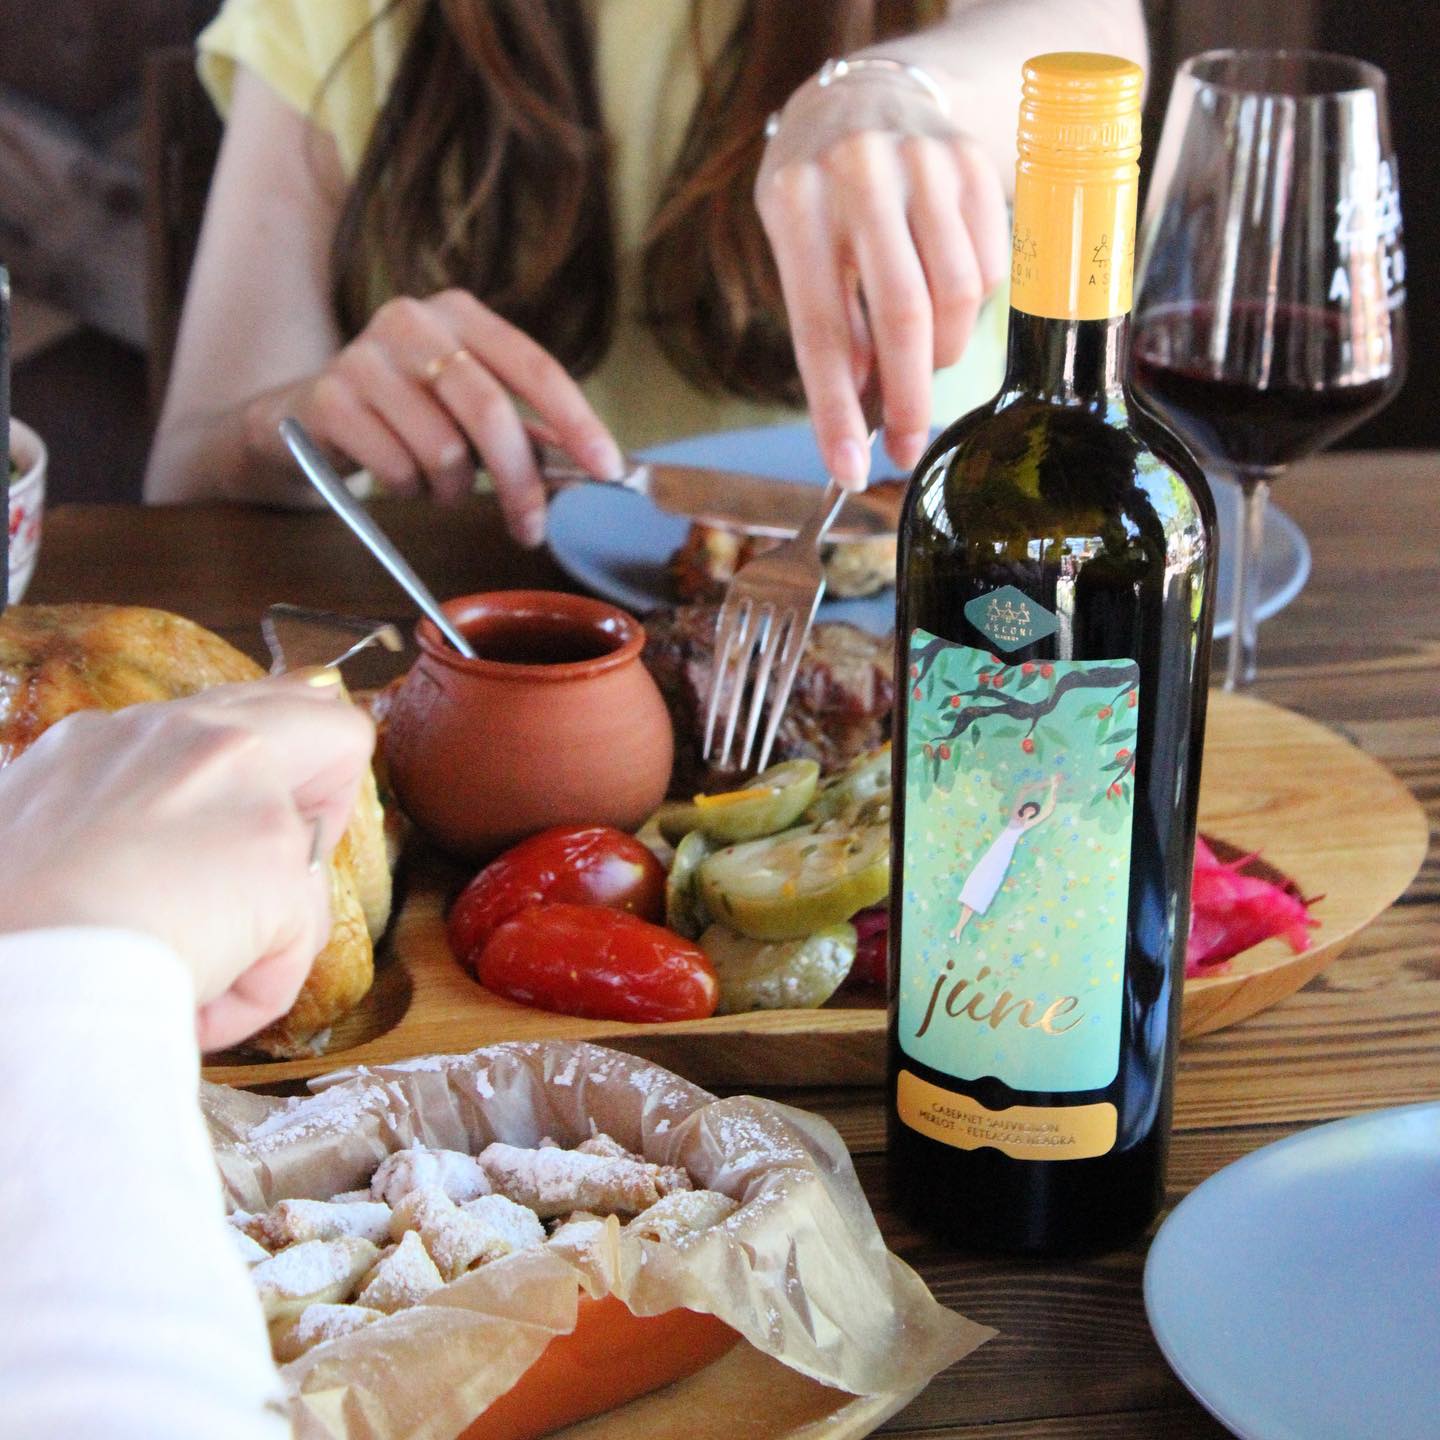 Cabernet Sauvignon - Merlot June blend by Asconi Winery pairs perfectly with Traditional Romanian food and cool summer vibes